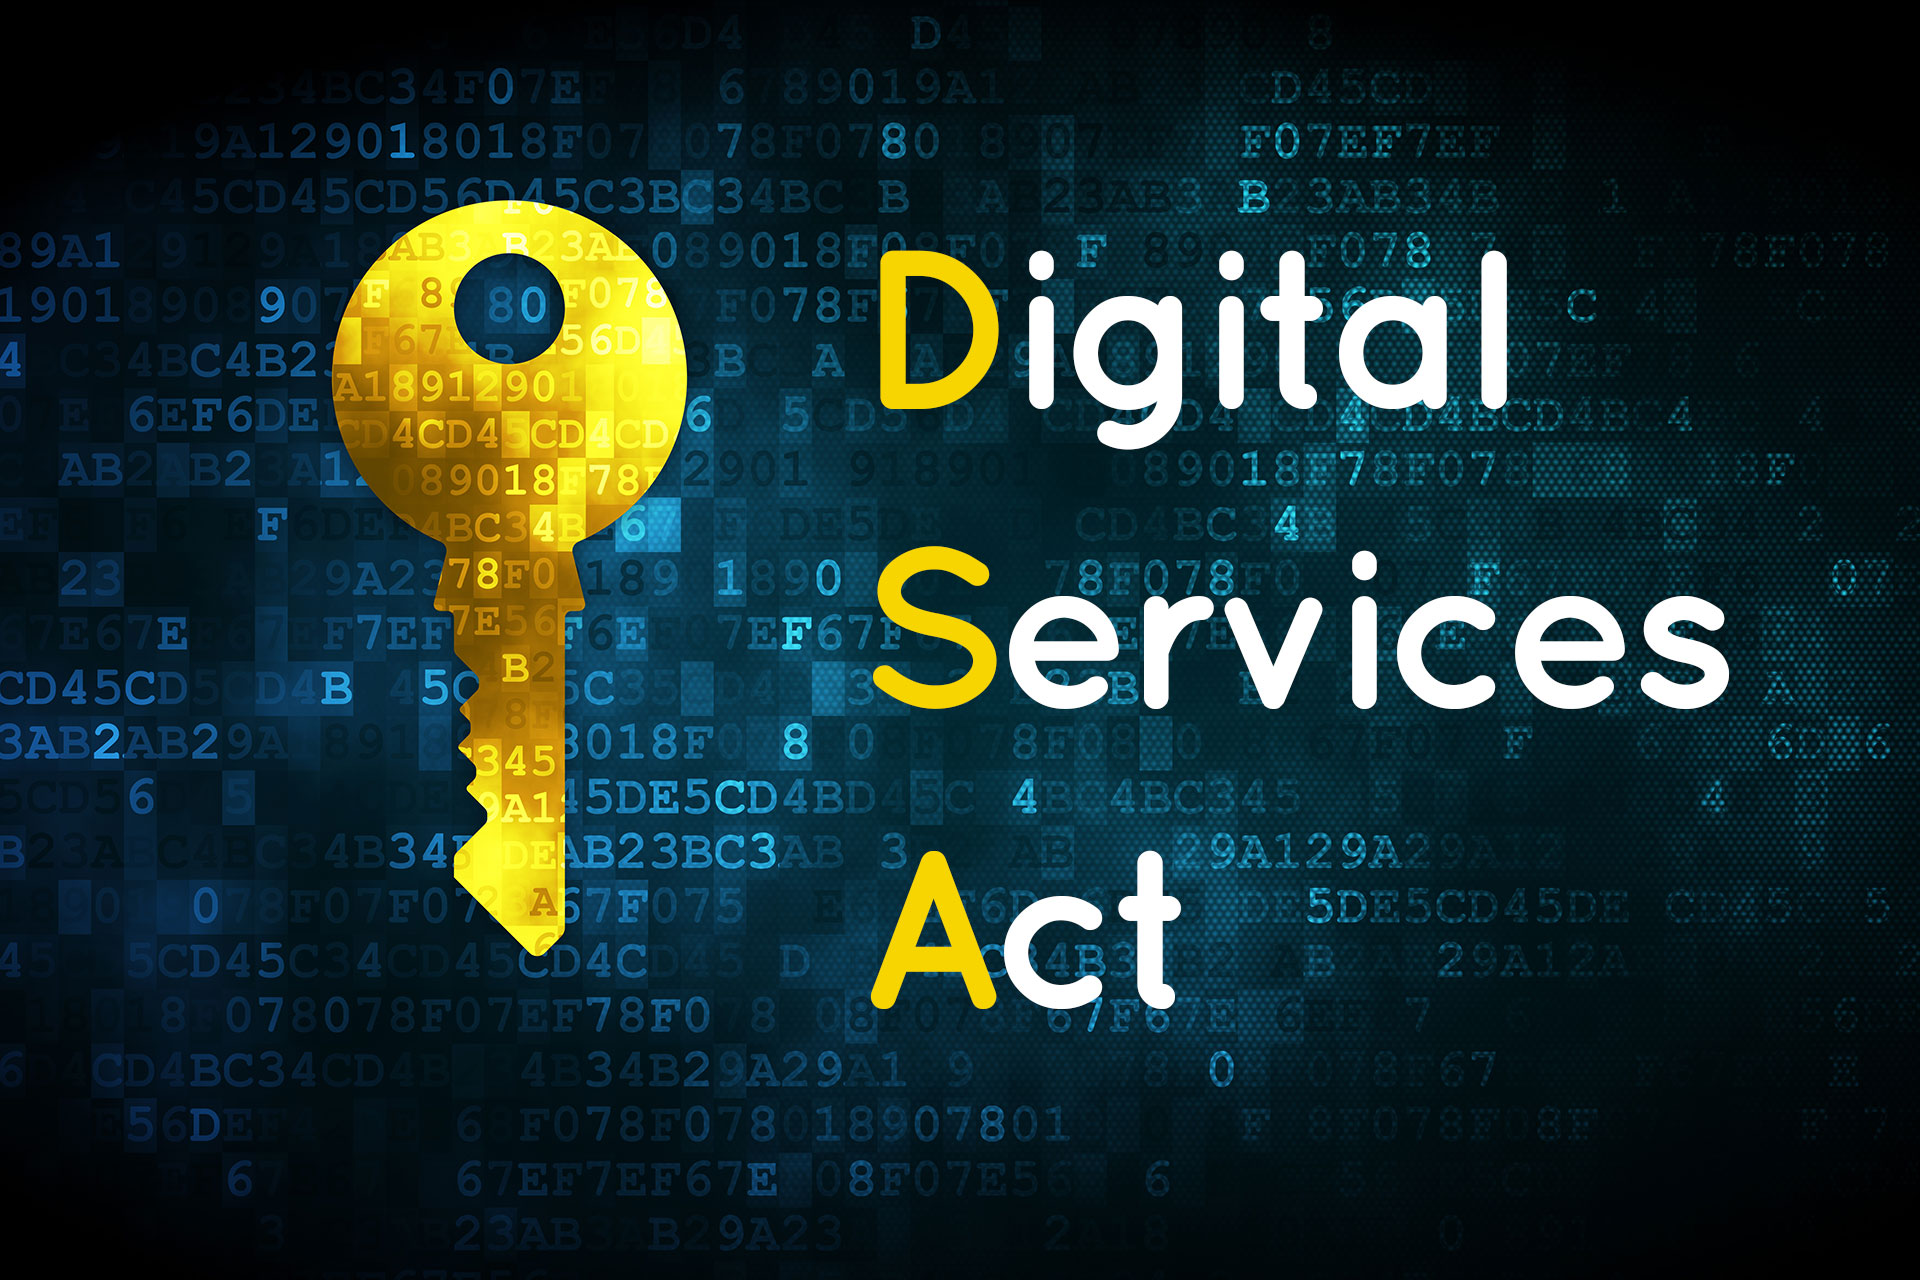 What You Need to Know about the European Union’s Digital Services Act (DSA)